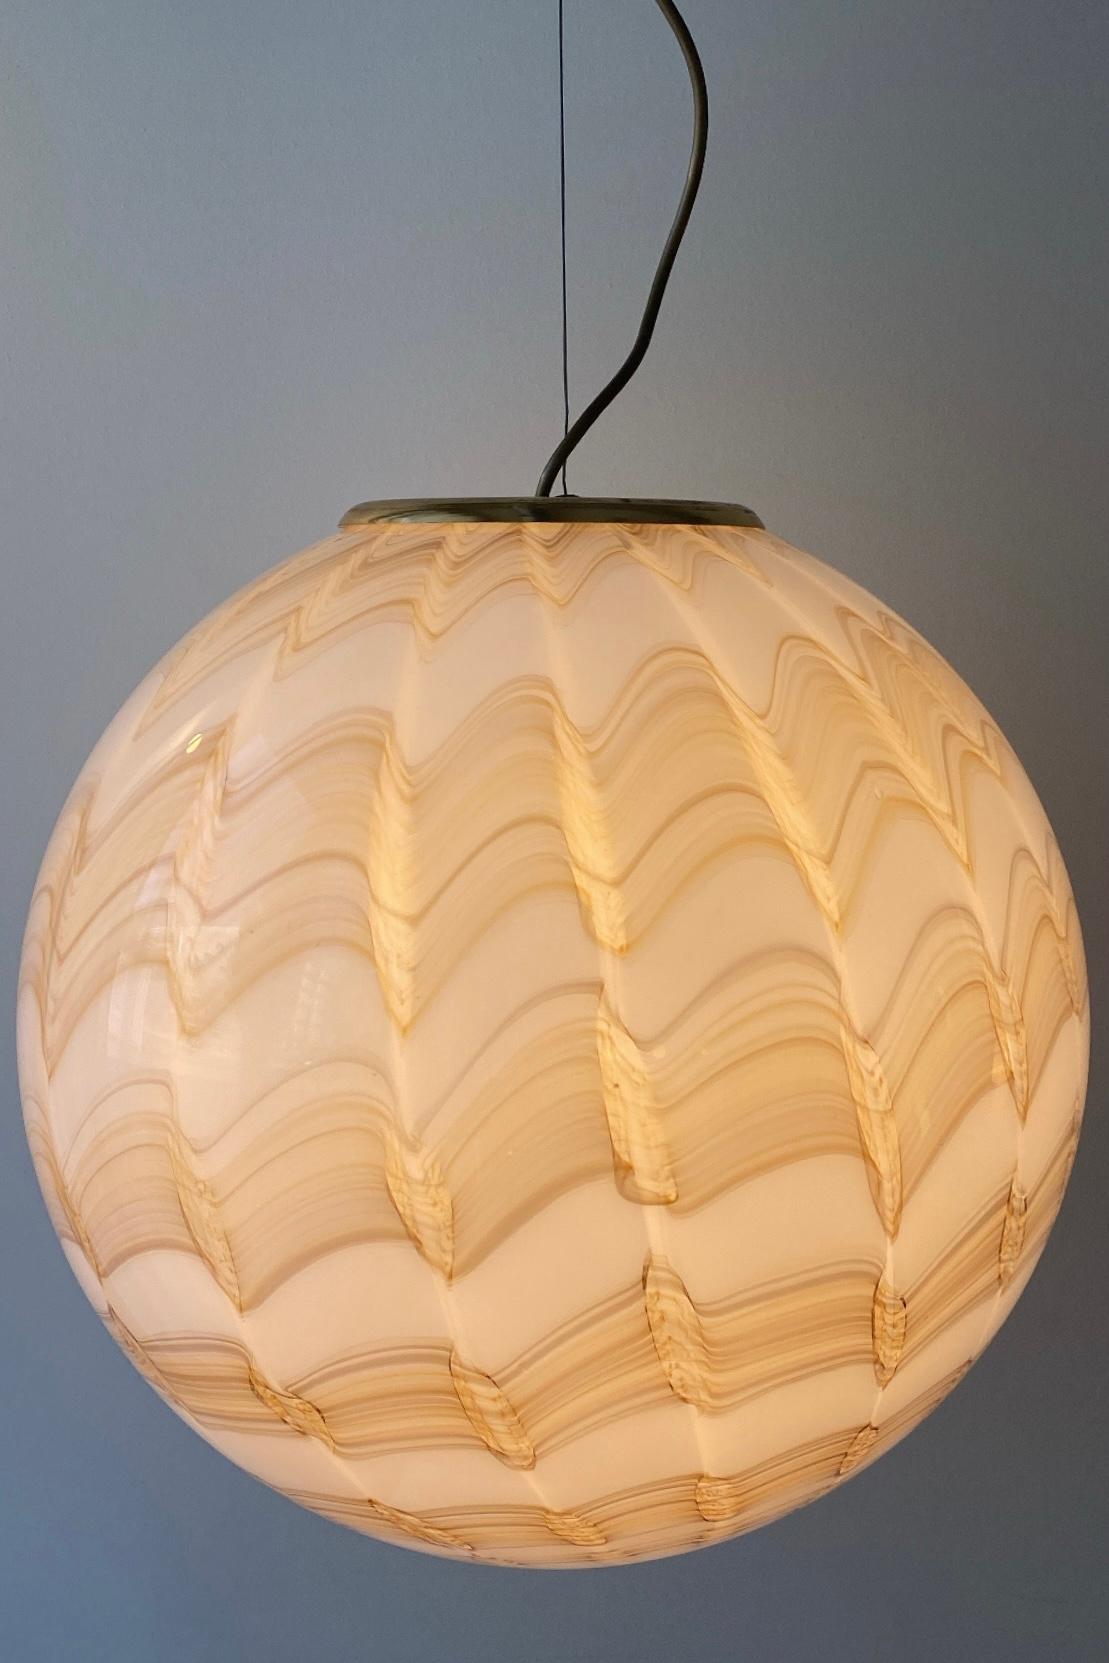 Vintage Murano pendant ceiling lamp. Mouth-blown in white / cream glass with a special pattern and has an adjustable brass suspension. Handmade in Italy, 1970s.
D: 45 cm H: 33 cm.